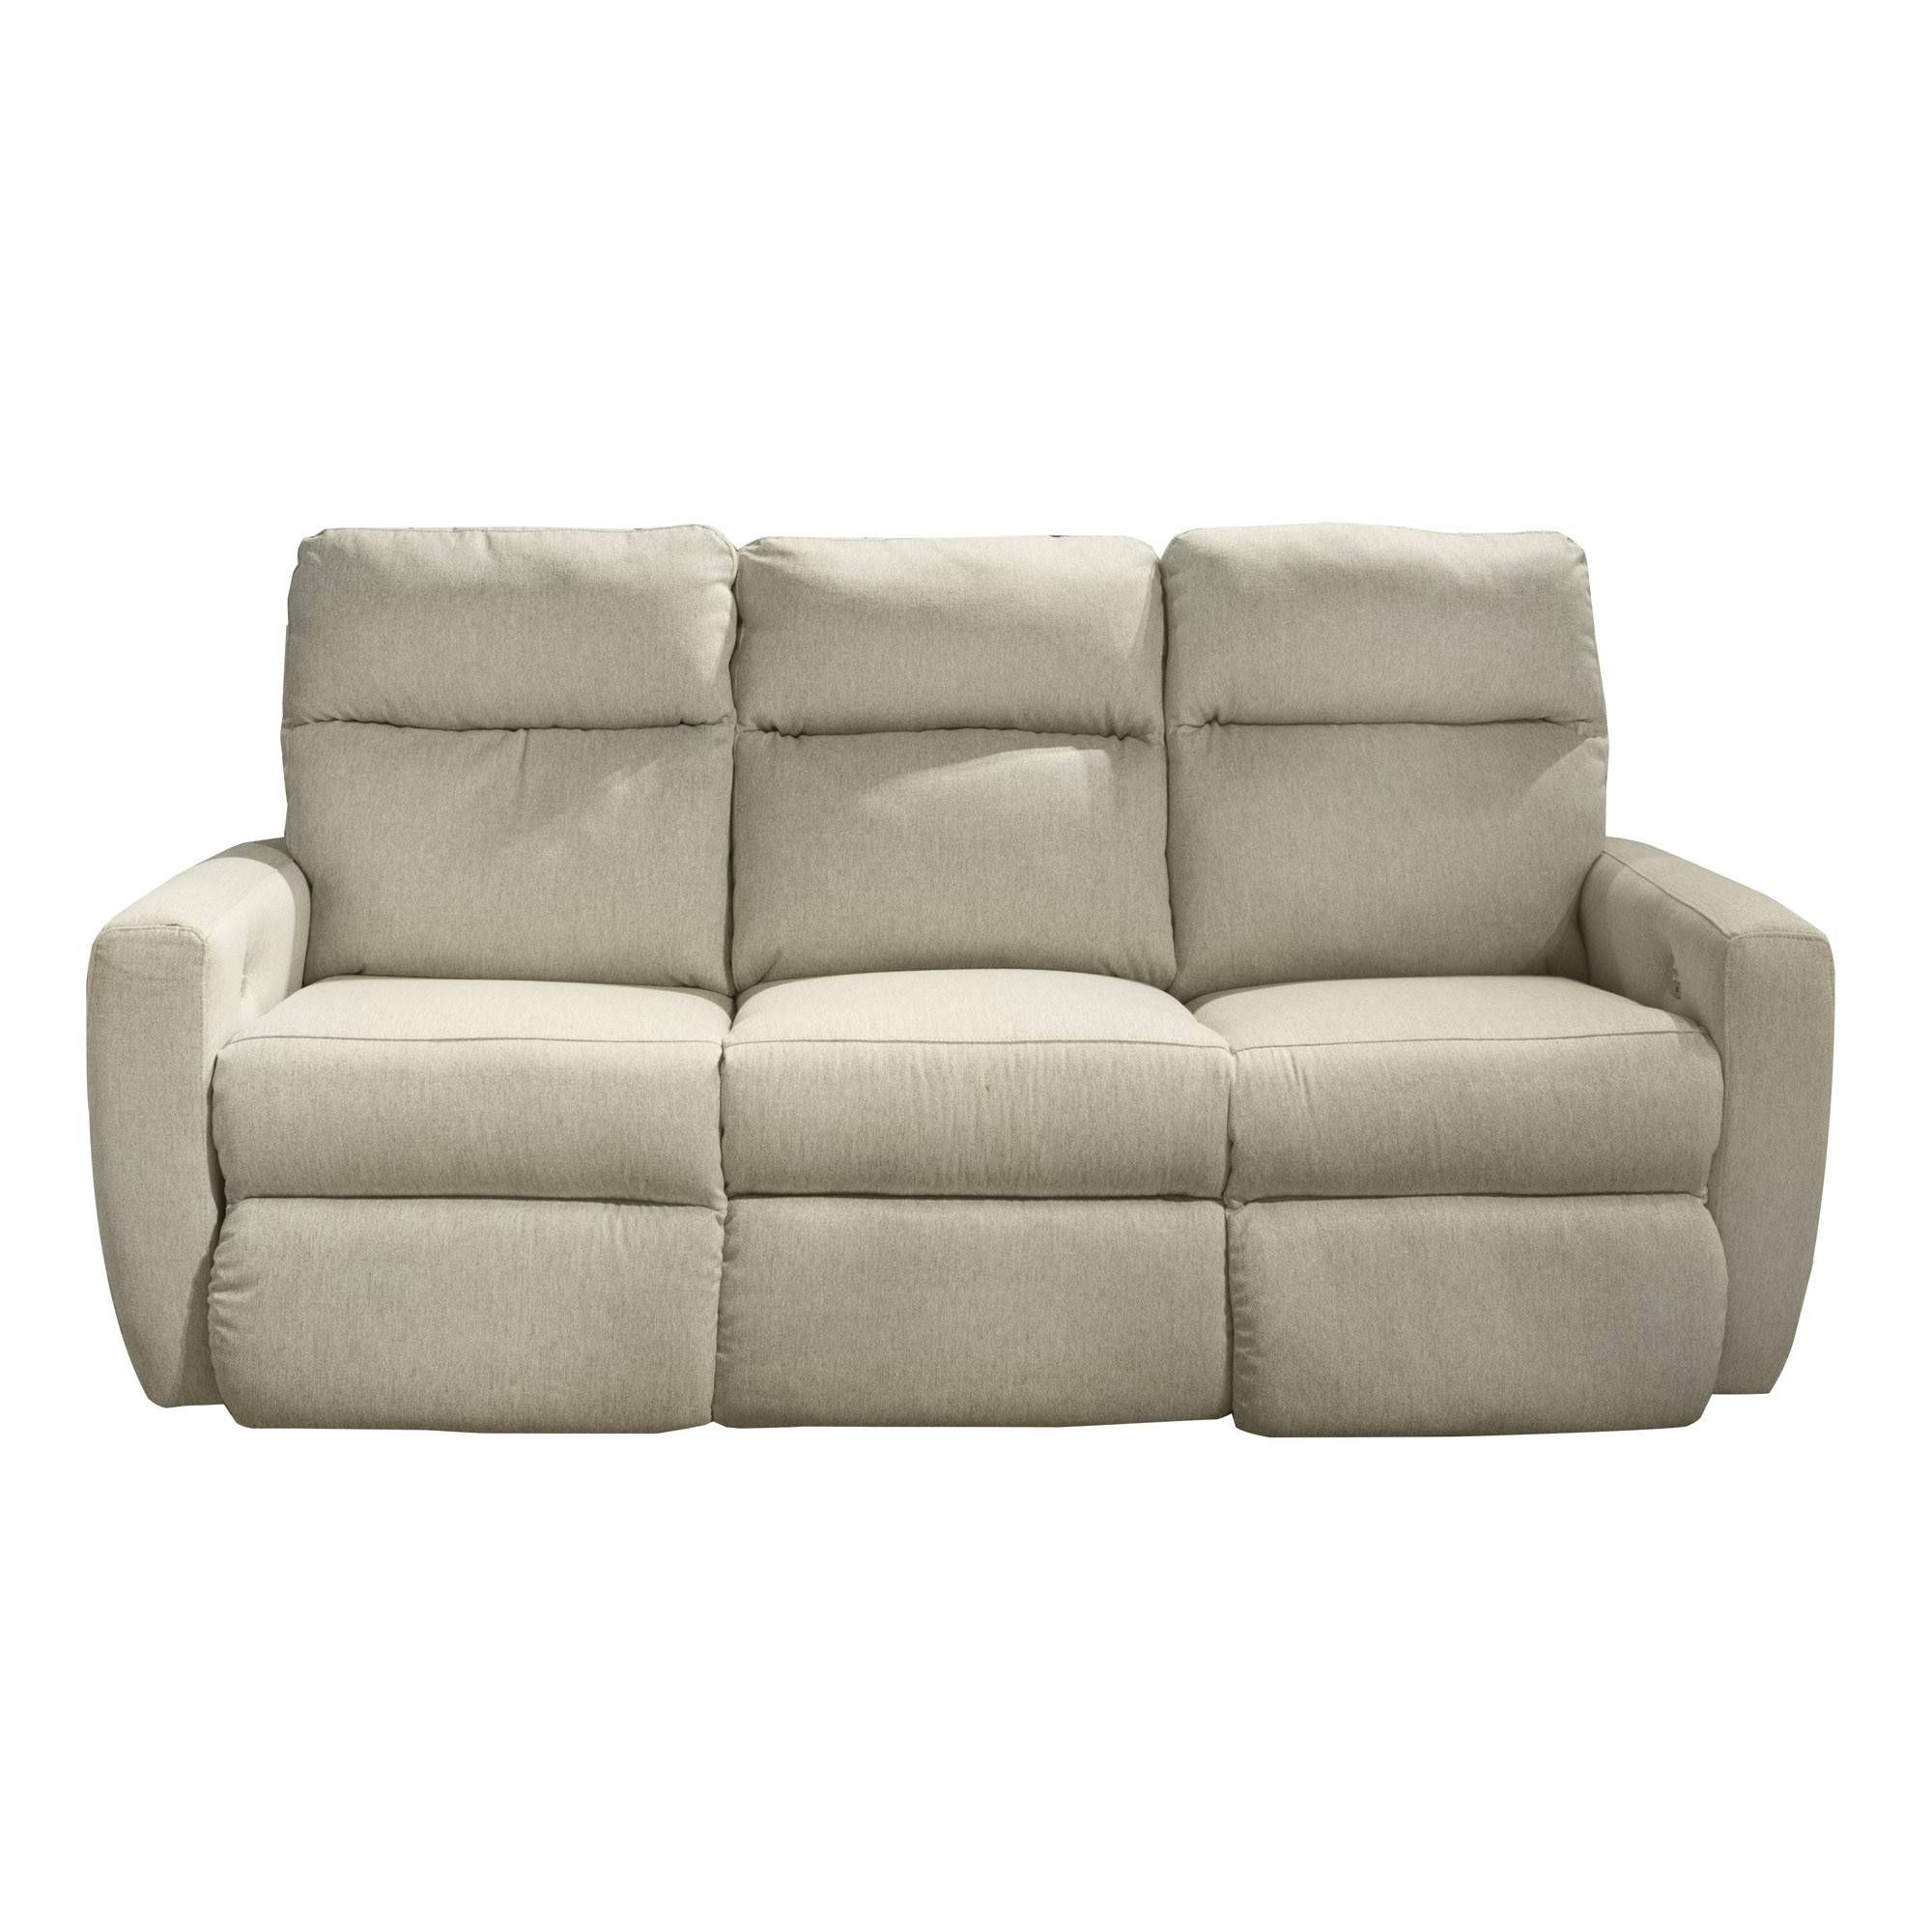 Knockout Power Reclining Sofa With Power Headrest – Motion – Sofas Within Rv Recliner Sofas (View 14 of 15)